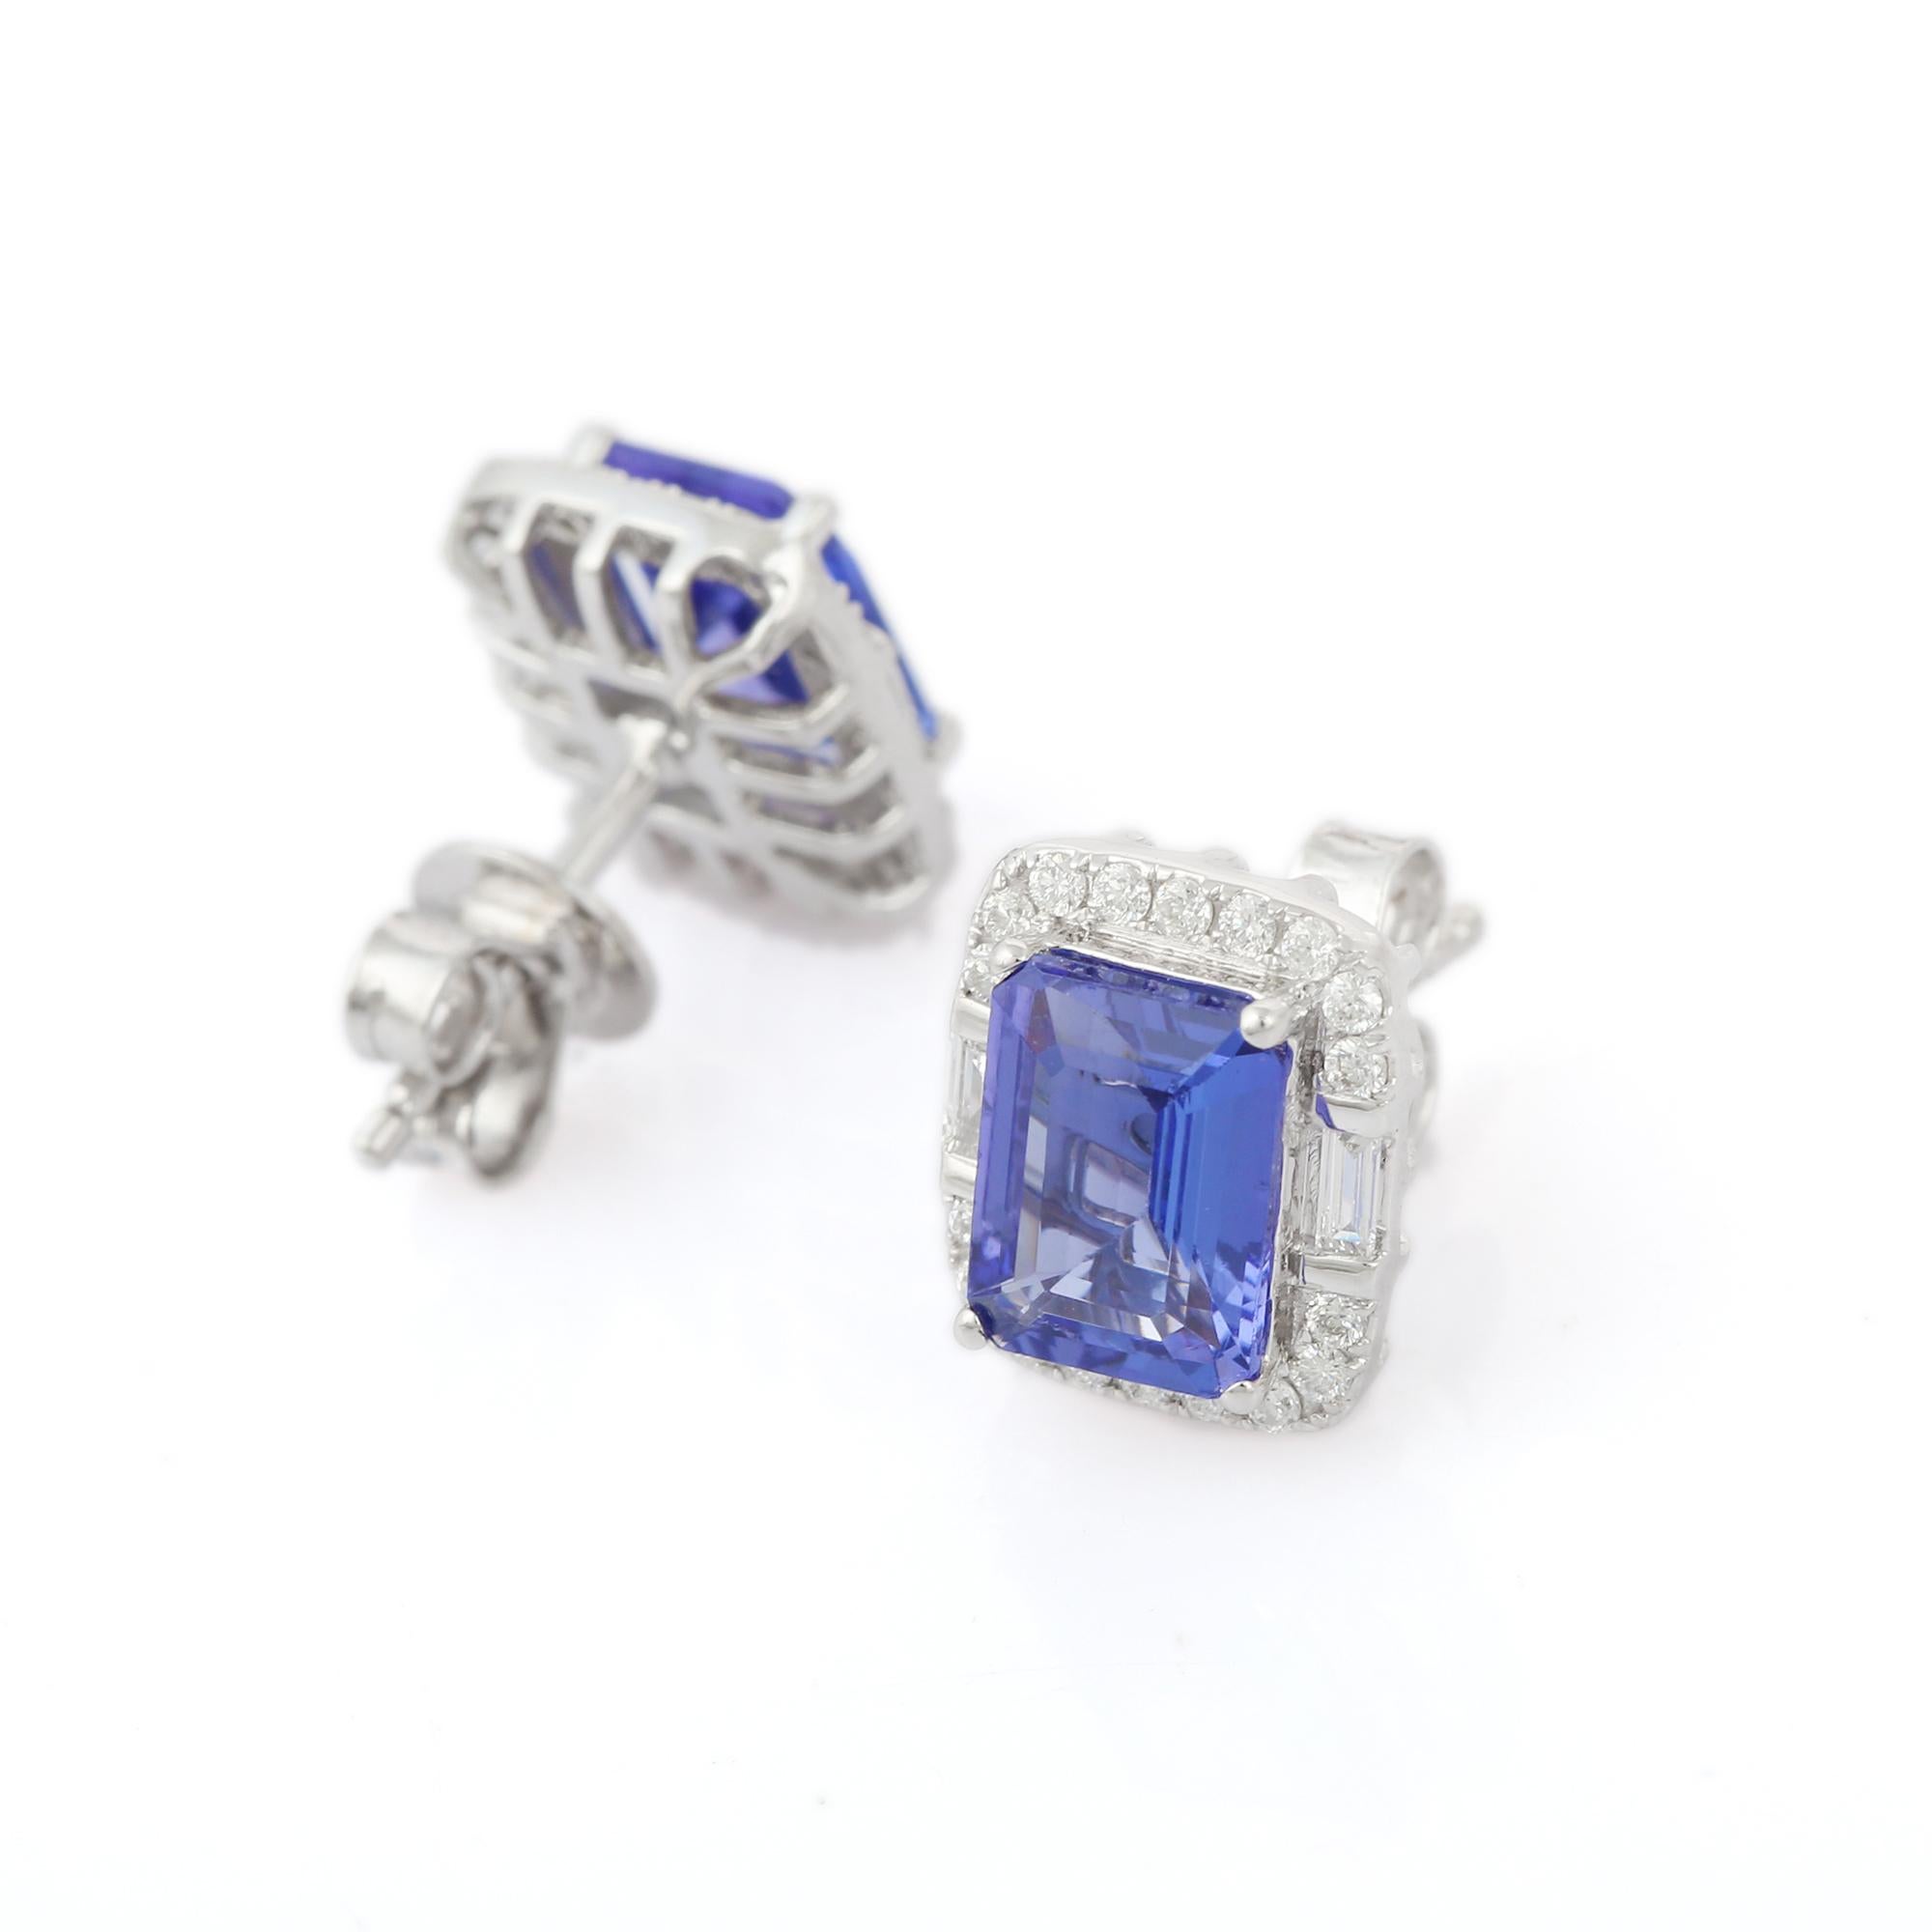 2.85 Carat Natural Tanzanite and Diamond Stud Earrings in 18K White Gold In New Condition For Sale In Houston, TX